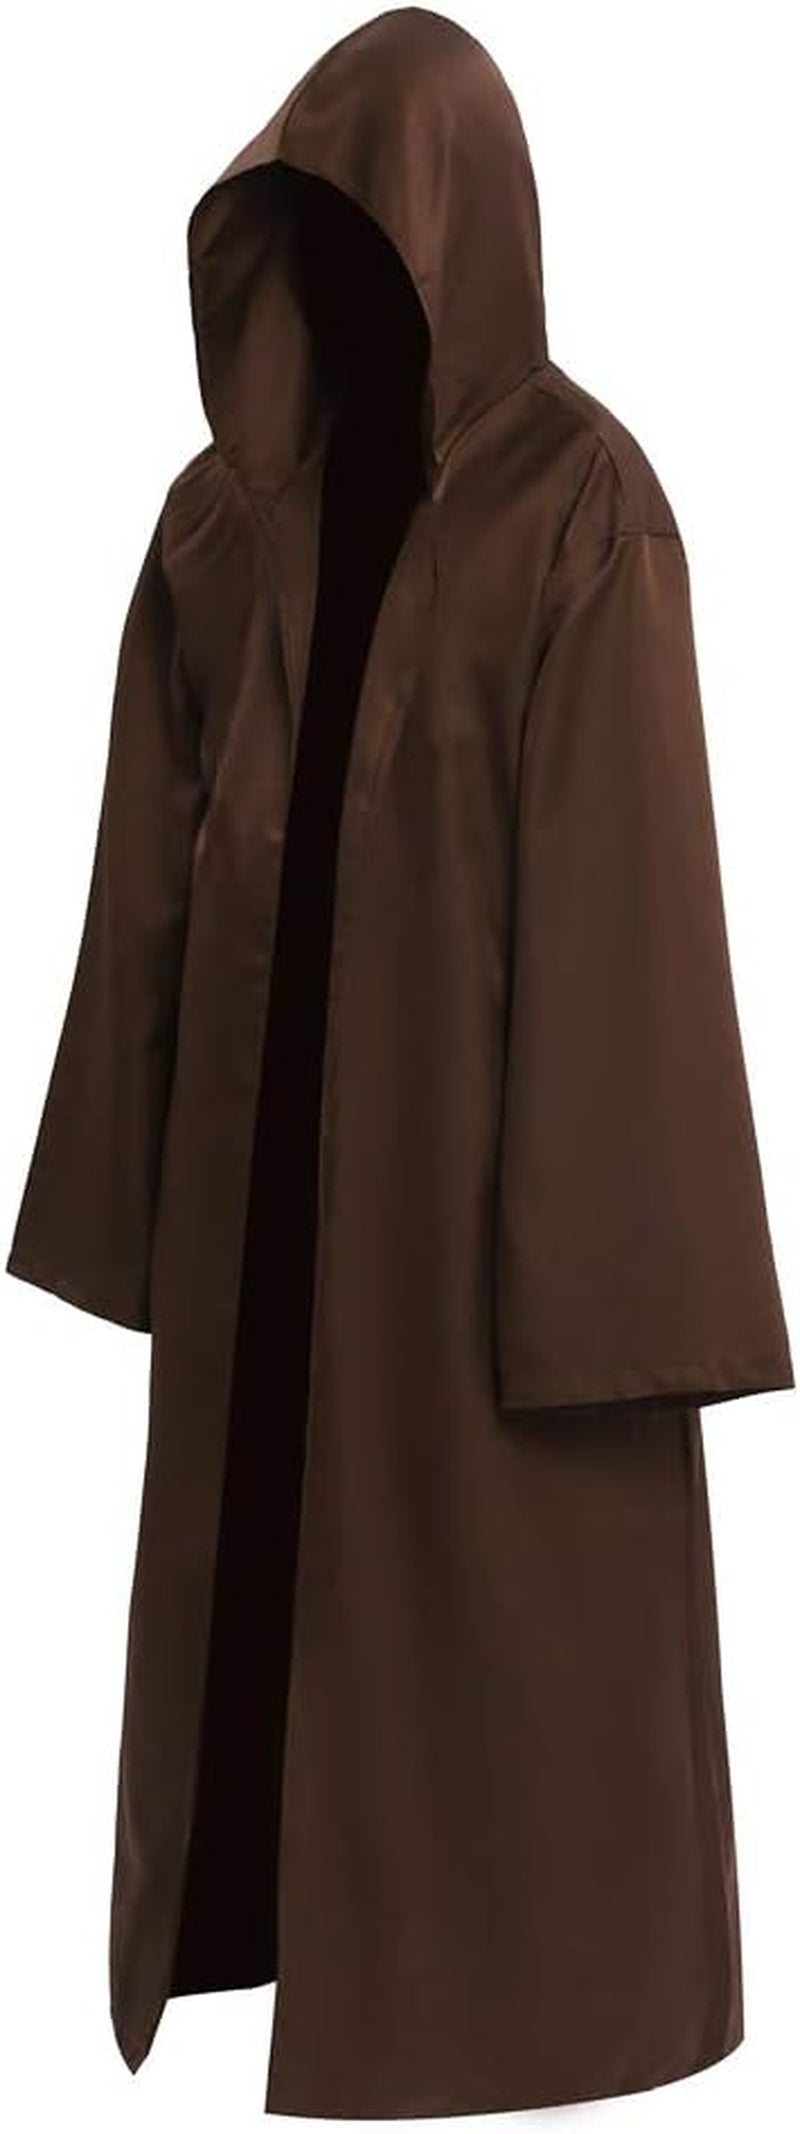 EONPOW Wizard Tunic Hooded Robe Halloween Cloak Cosplay Costumes  EONPOW Brown Small 